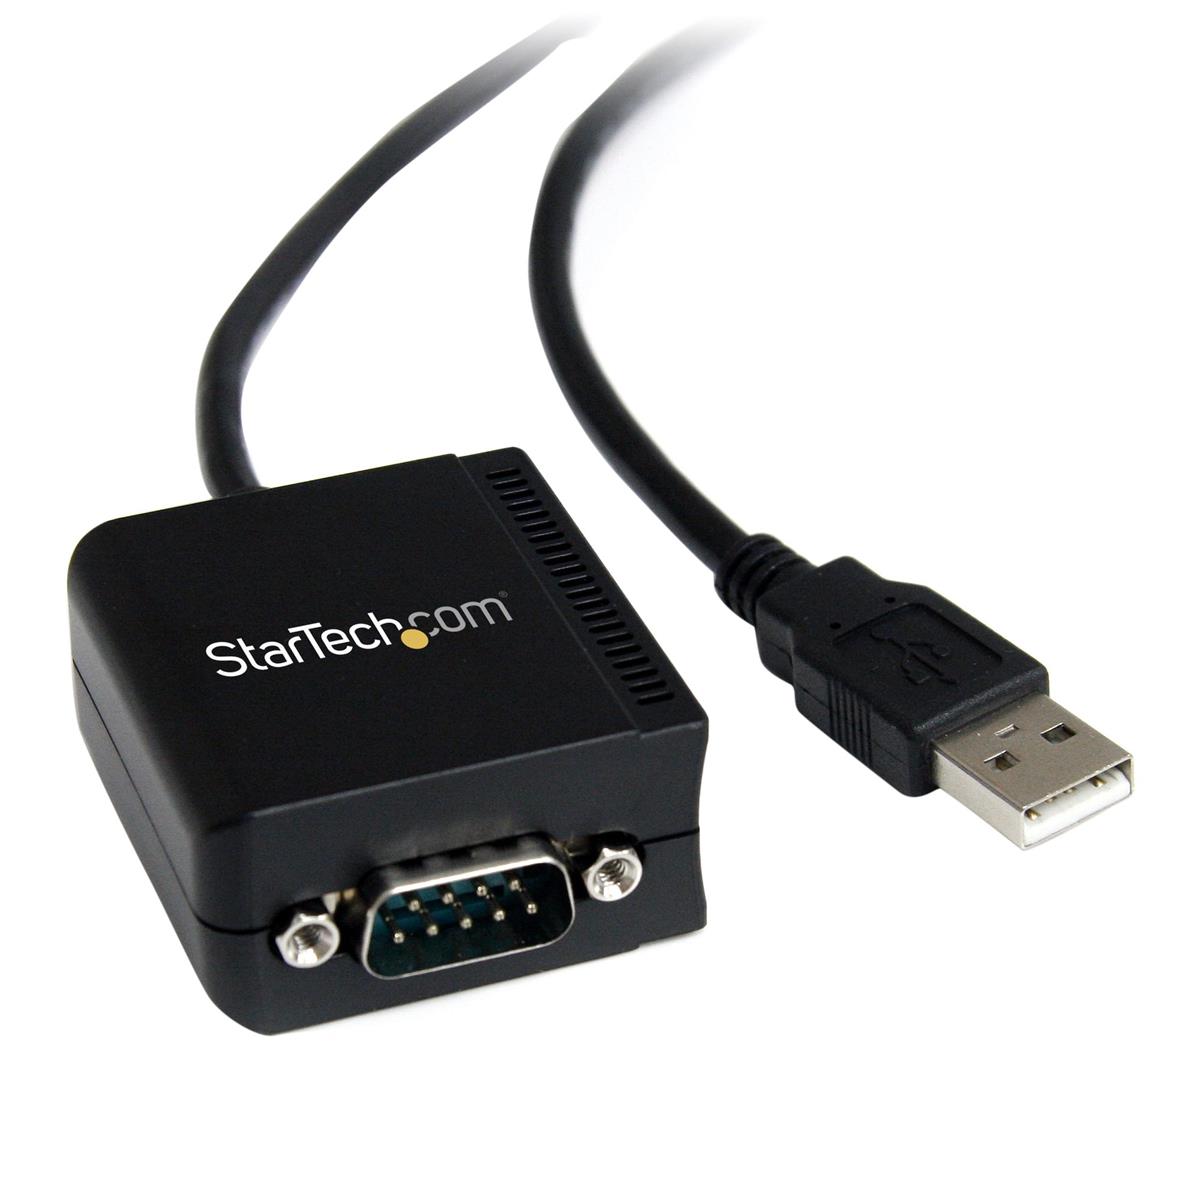 Image of StarTech 8' 1 Port FTDI USB to Serial RS232 Adapter Cable with Optical Isolation